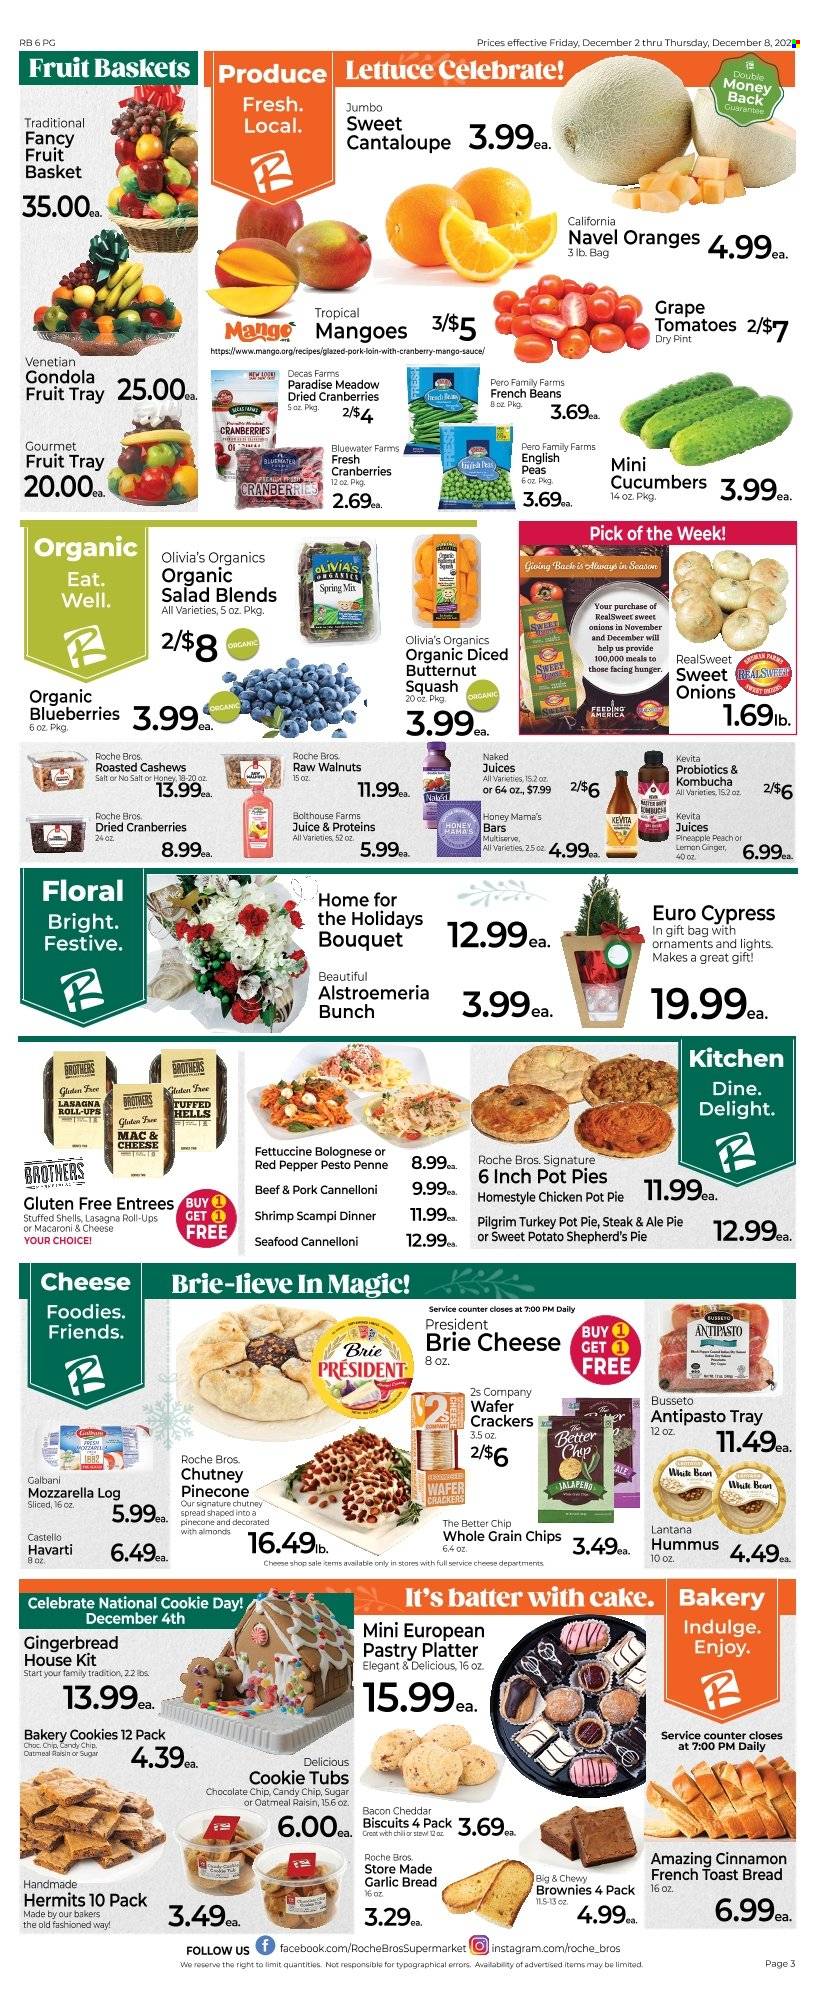 thumbnail - Roche Bros. Flyer - 12/02/2022 - 12/08/2022 - Sales products - bread, cake, toast bread, gingerbread, pot pie, brownies, beans, cantaloupe, french beans, ginger, sweet potato, tomatoes, peas, lettuce, salad, jalapeño, blueberries, pineapple, oranges, seafood, shrimps, macaroni & cheese, sauce, lasagna meal, Mama's, bacon, hummus, mozzarella, Havarti, brie, Président, Galbani, cookies, wafers, crackers, biscuit, chips, sugar, oatmeal, cranberries, penne, cinnamon, pesto, chutney, cashews, walnuts, dried fruit, kombucha, KeVita, BROTHERS, steak, Bakers, bouquet, Alstroemeria, probiotics, butternut squash, navel oranges. Page 4.